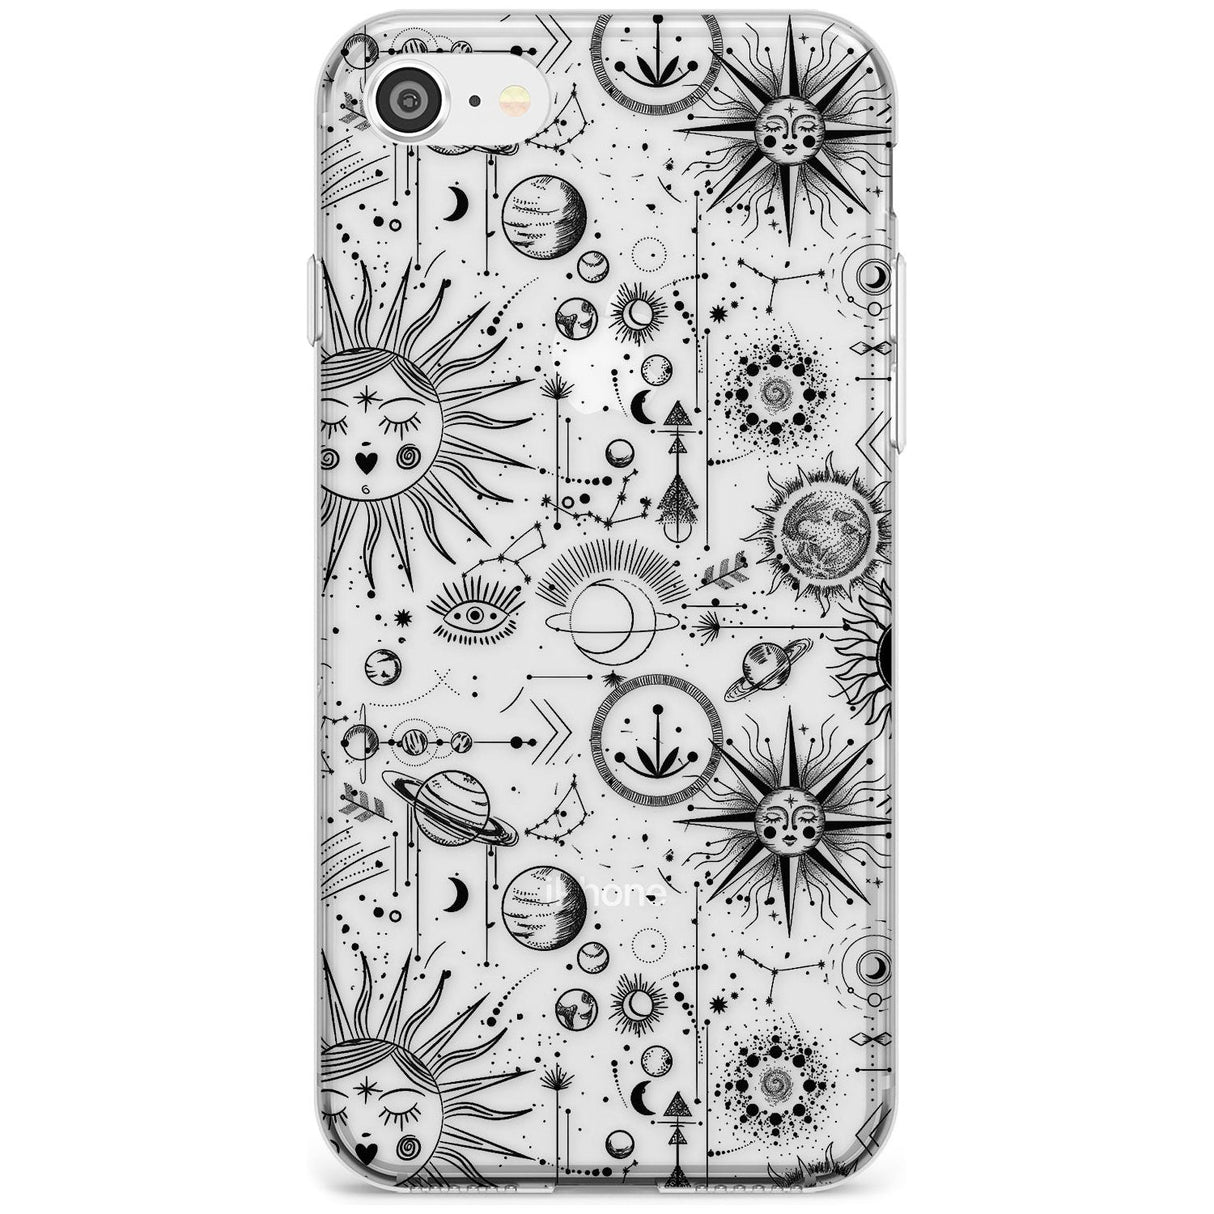 Suns & Planets Vintage Astrological Slim TPU Phone Case for iPhone SE 8 7 Plus